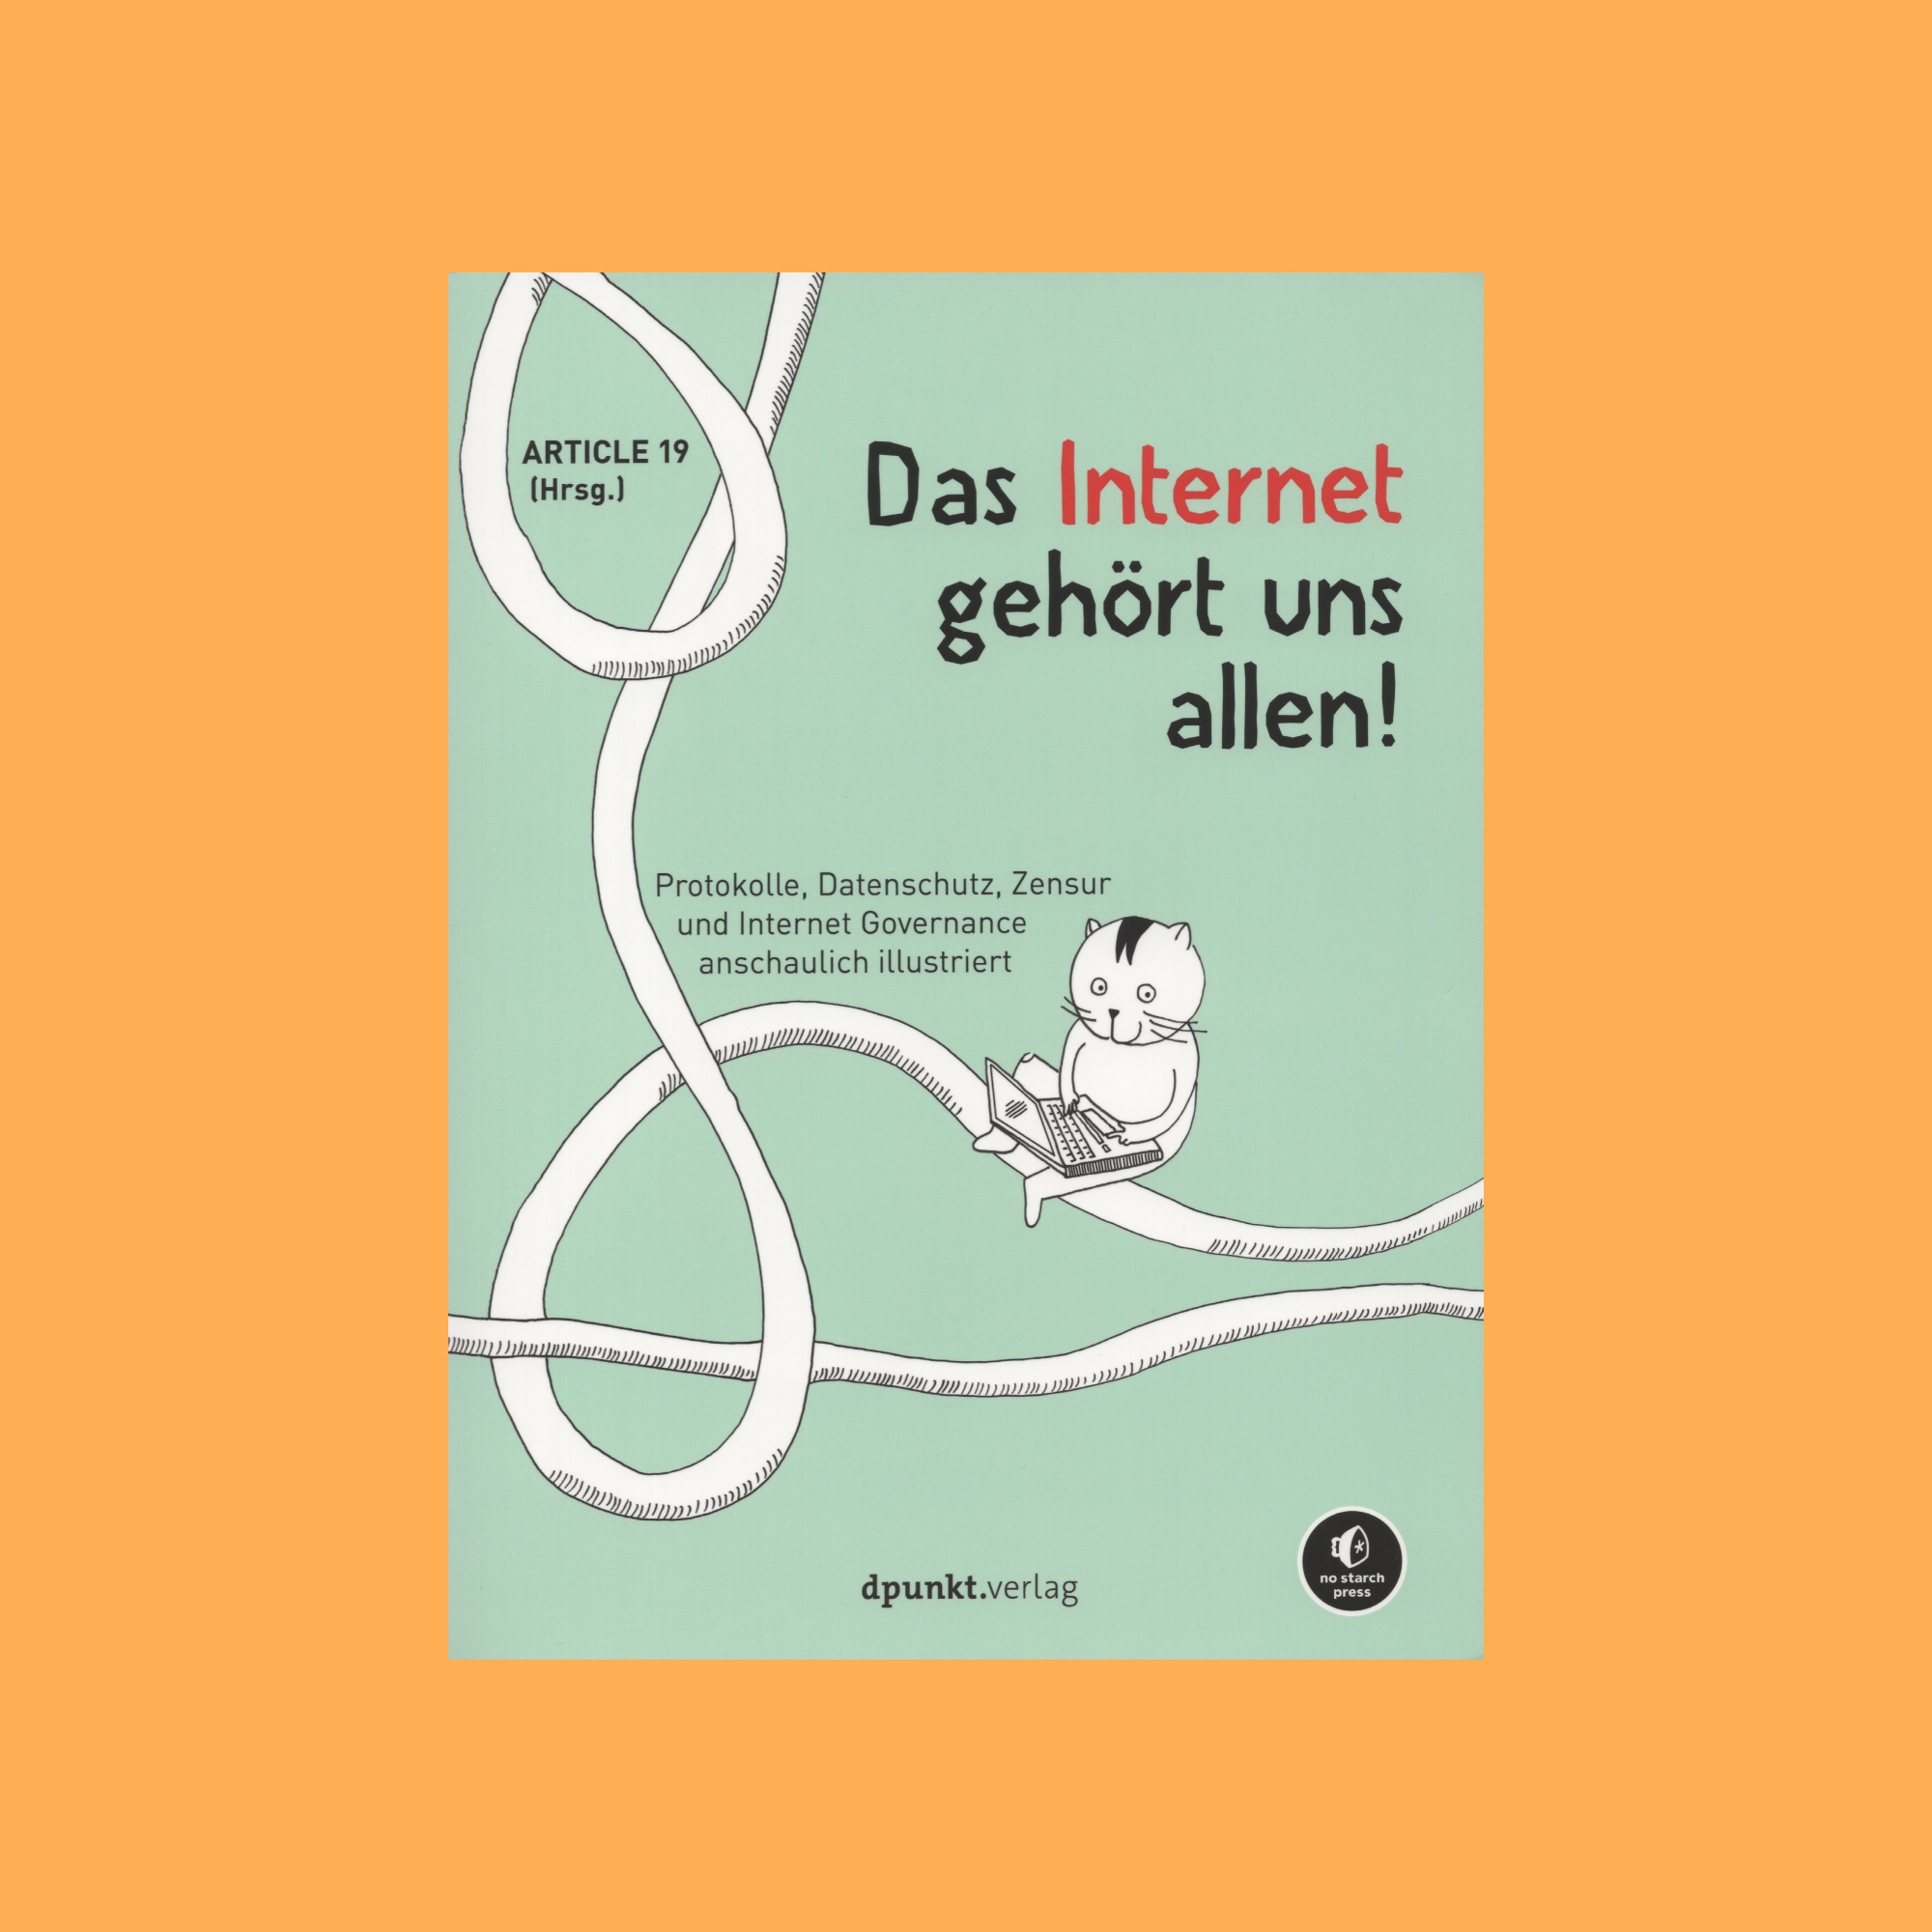 How the Internet Really Works book backcover. Illustration and Layout: Ulrike Uhlig